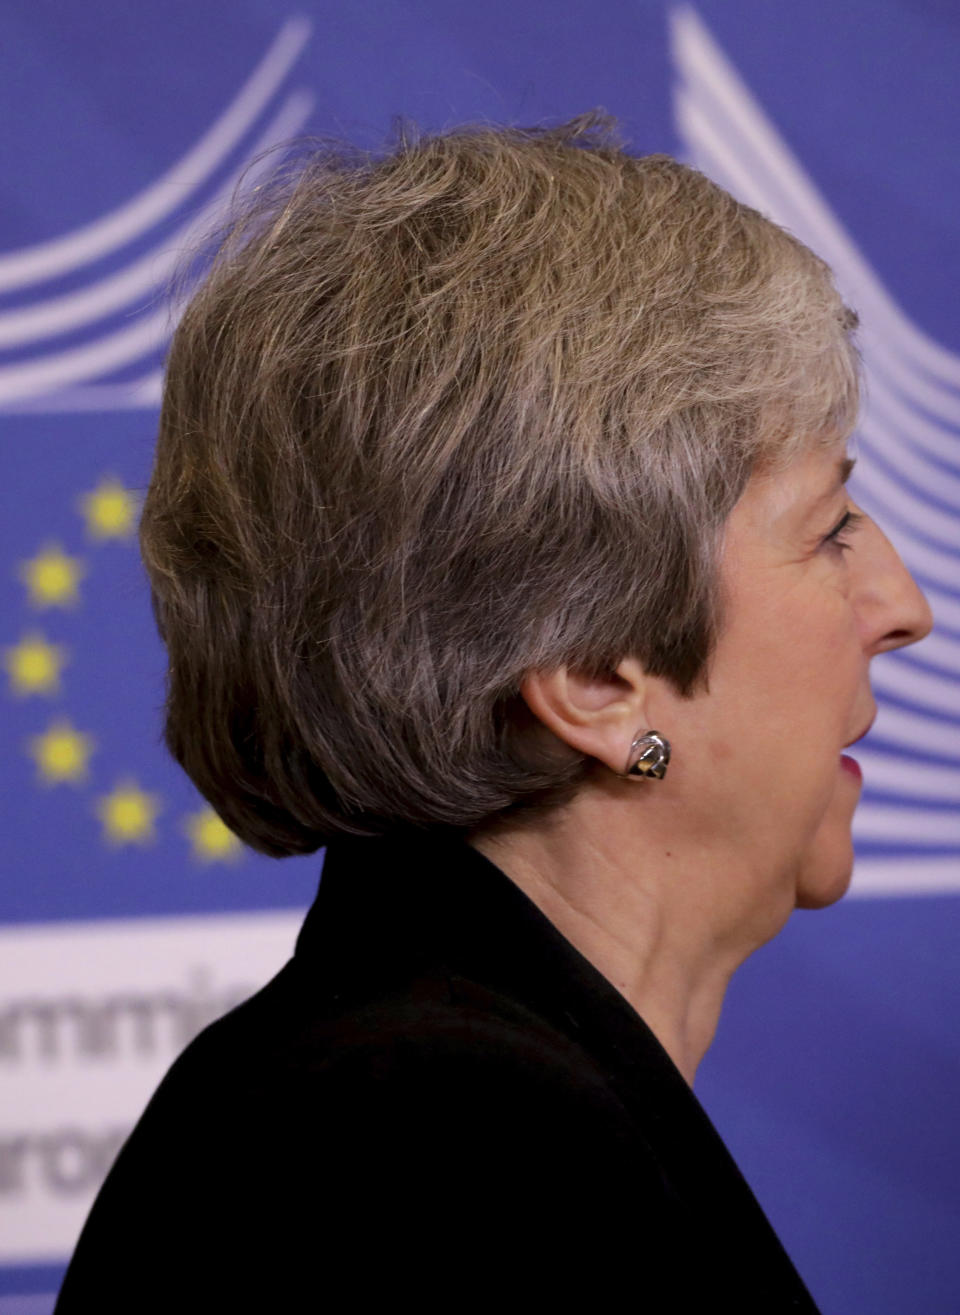 British Prime Minister Theresa May arrives for a meeting with European Commission President Jean-Claude Juncker at EU headquarters in Brussels, Wednesday, Feb. 20, 2019. European Commission President Jean-Claude Juncker and British Prime Minister Theresa May meet Wednesday for their latest negotiating session to seek an elusive breakthrough in Brexit negotiations. (AP Photo/Olivier Matthys)